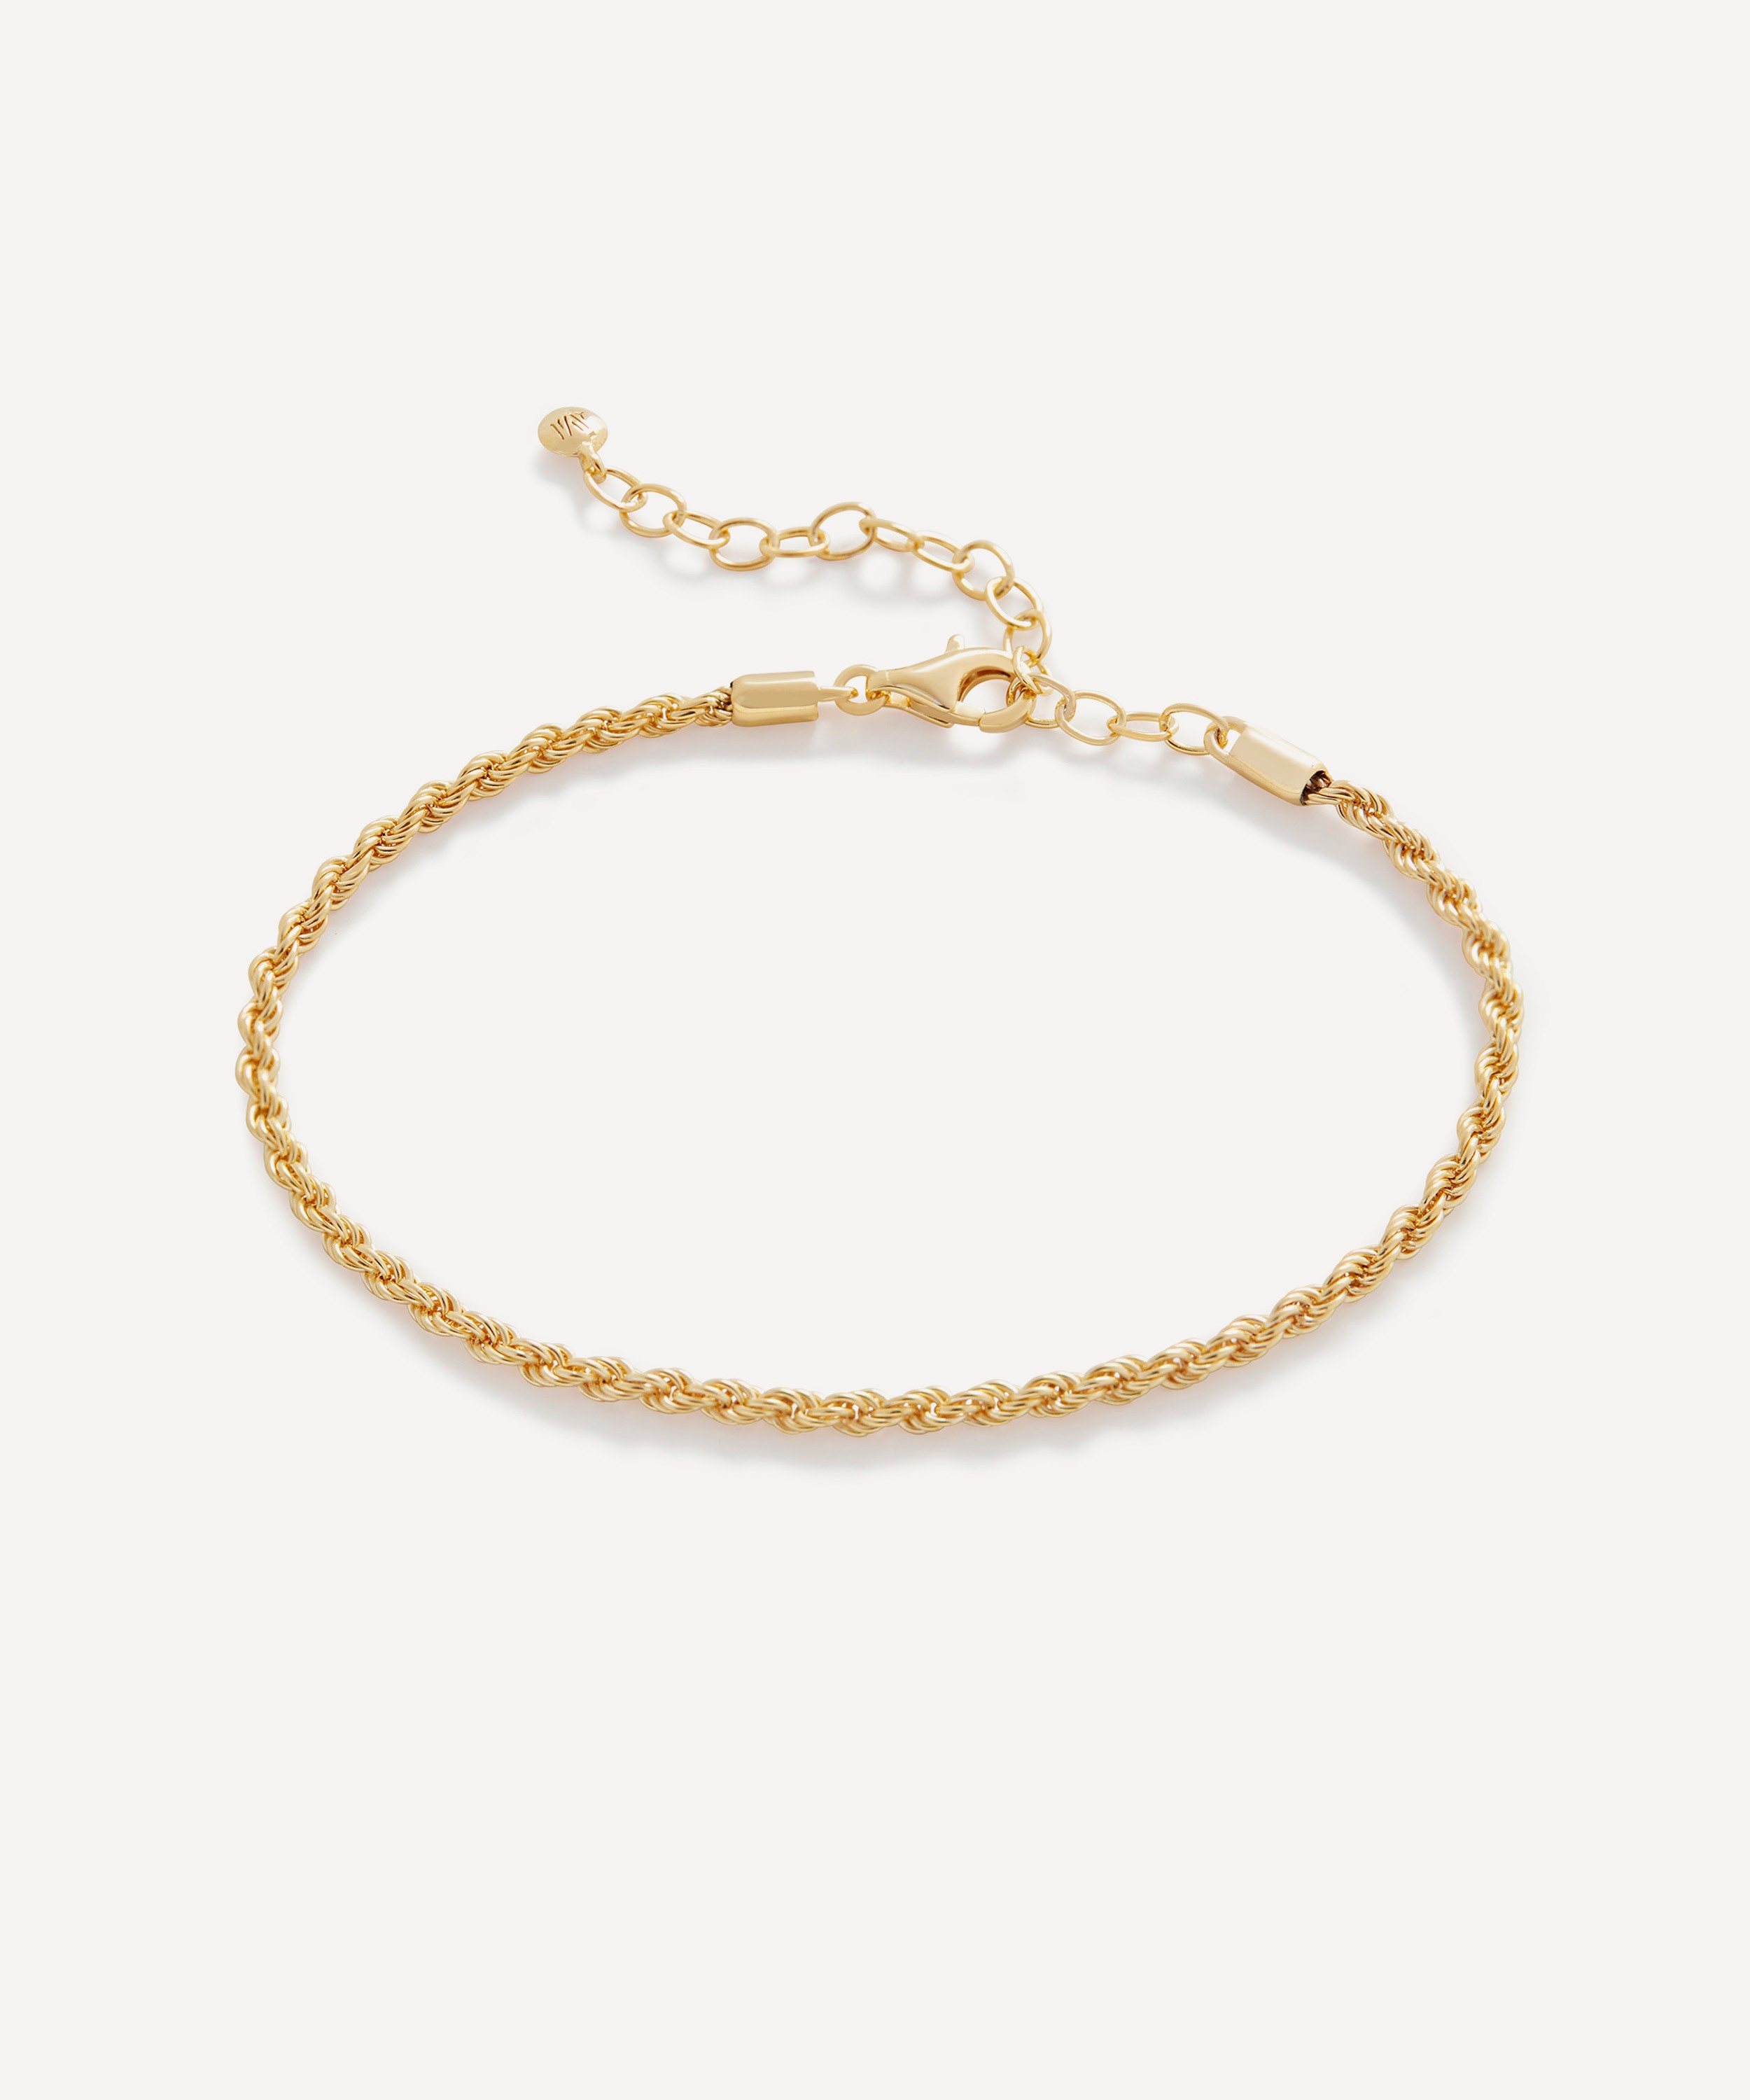 Monica Vinader - 18ct Gold-Plated Vermeil Silver Rope Chain Bracelet